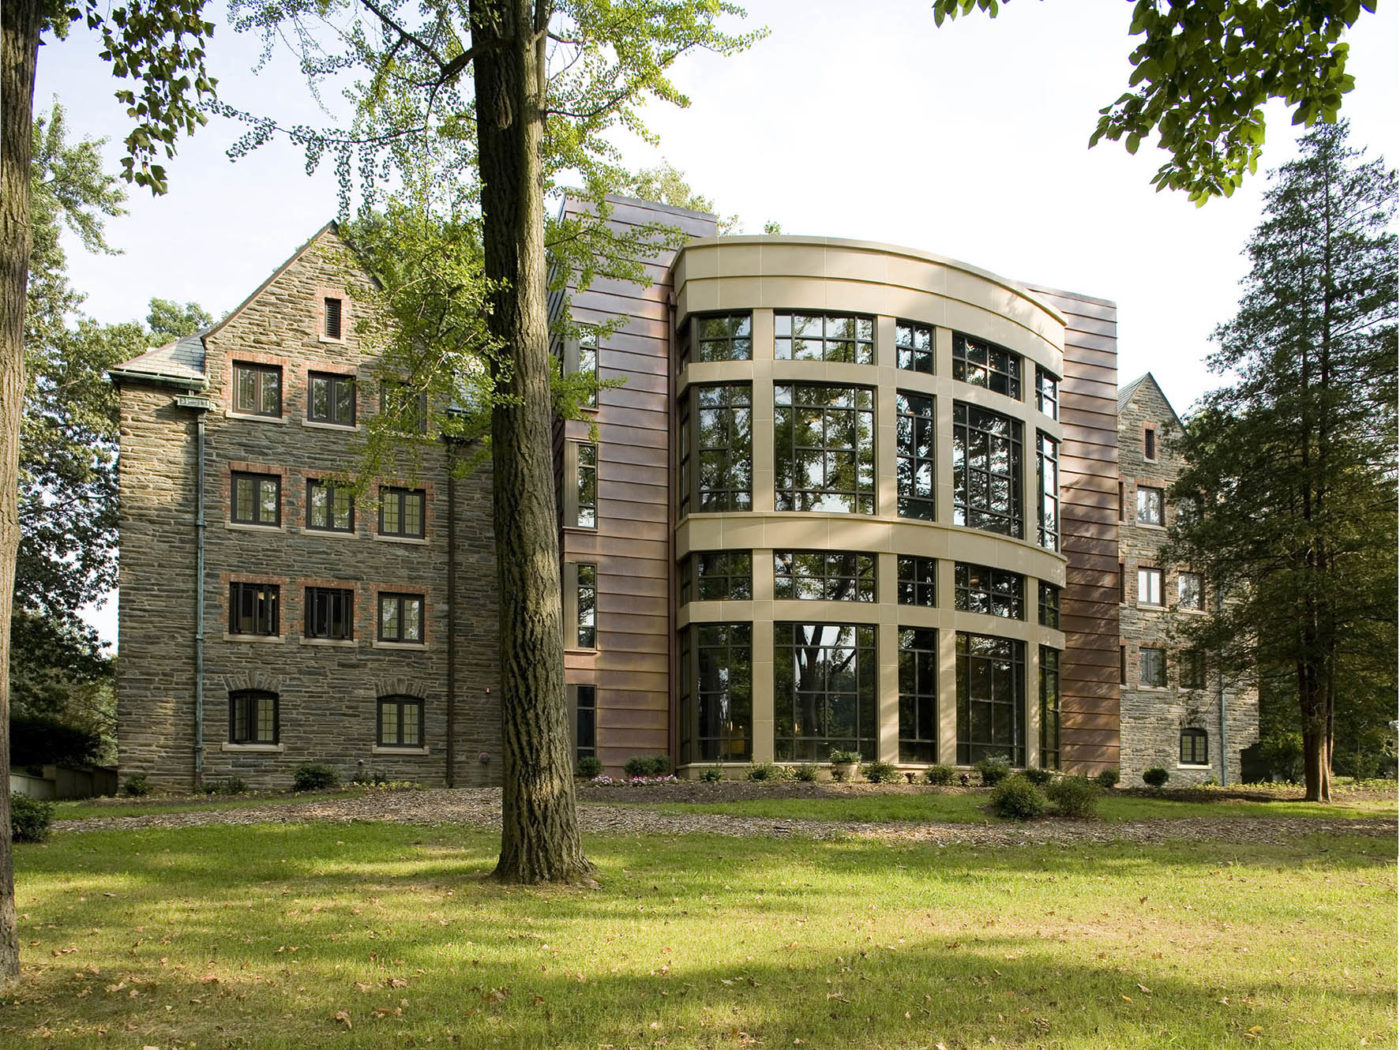 Connelly Hall, Rosemont College, dormitory, architecture, college